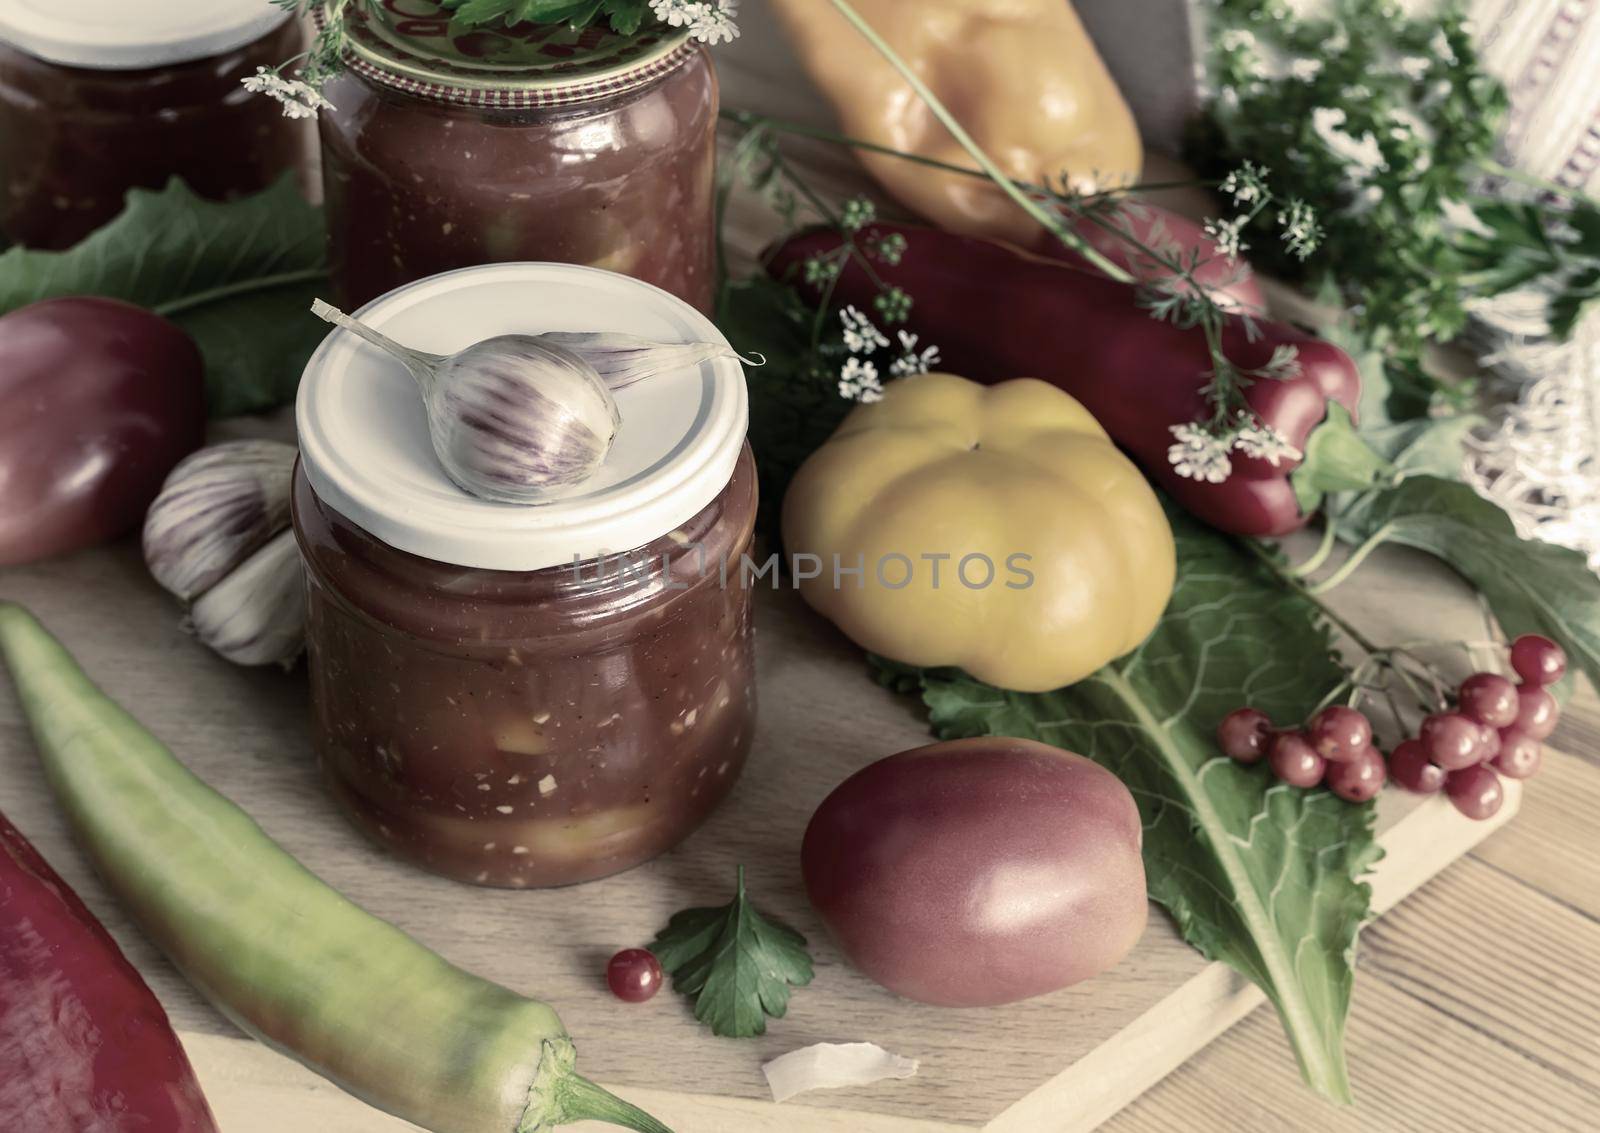 Home canning: canned bell peppers in glass jars by georgina198